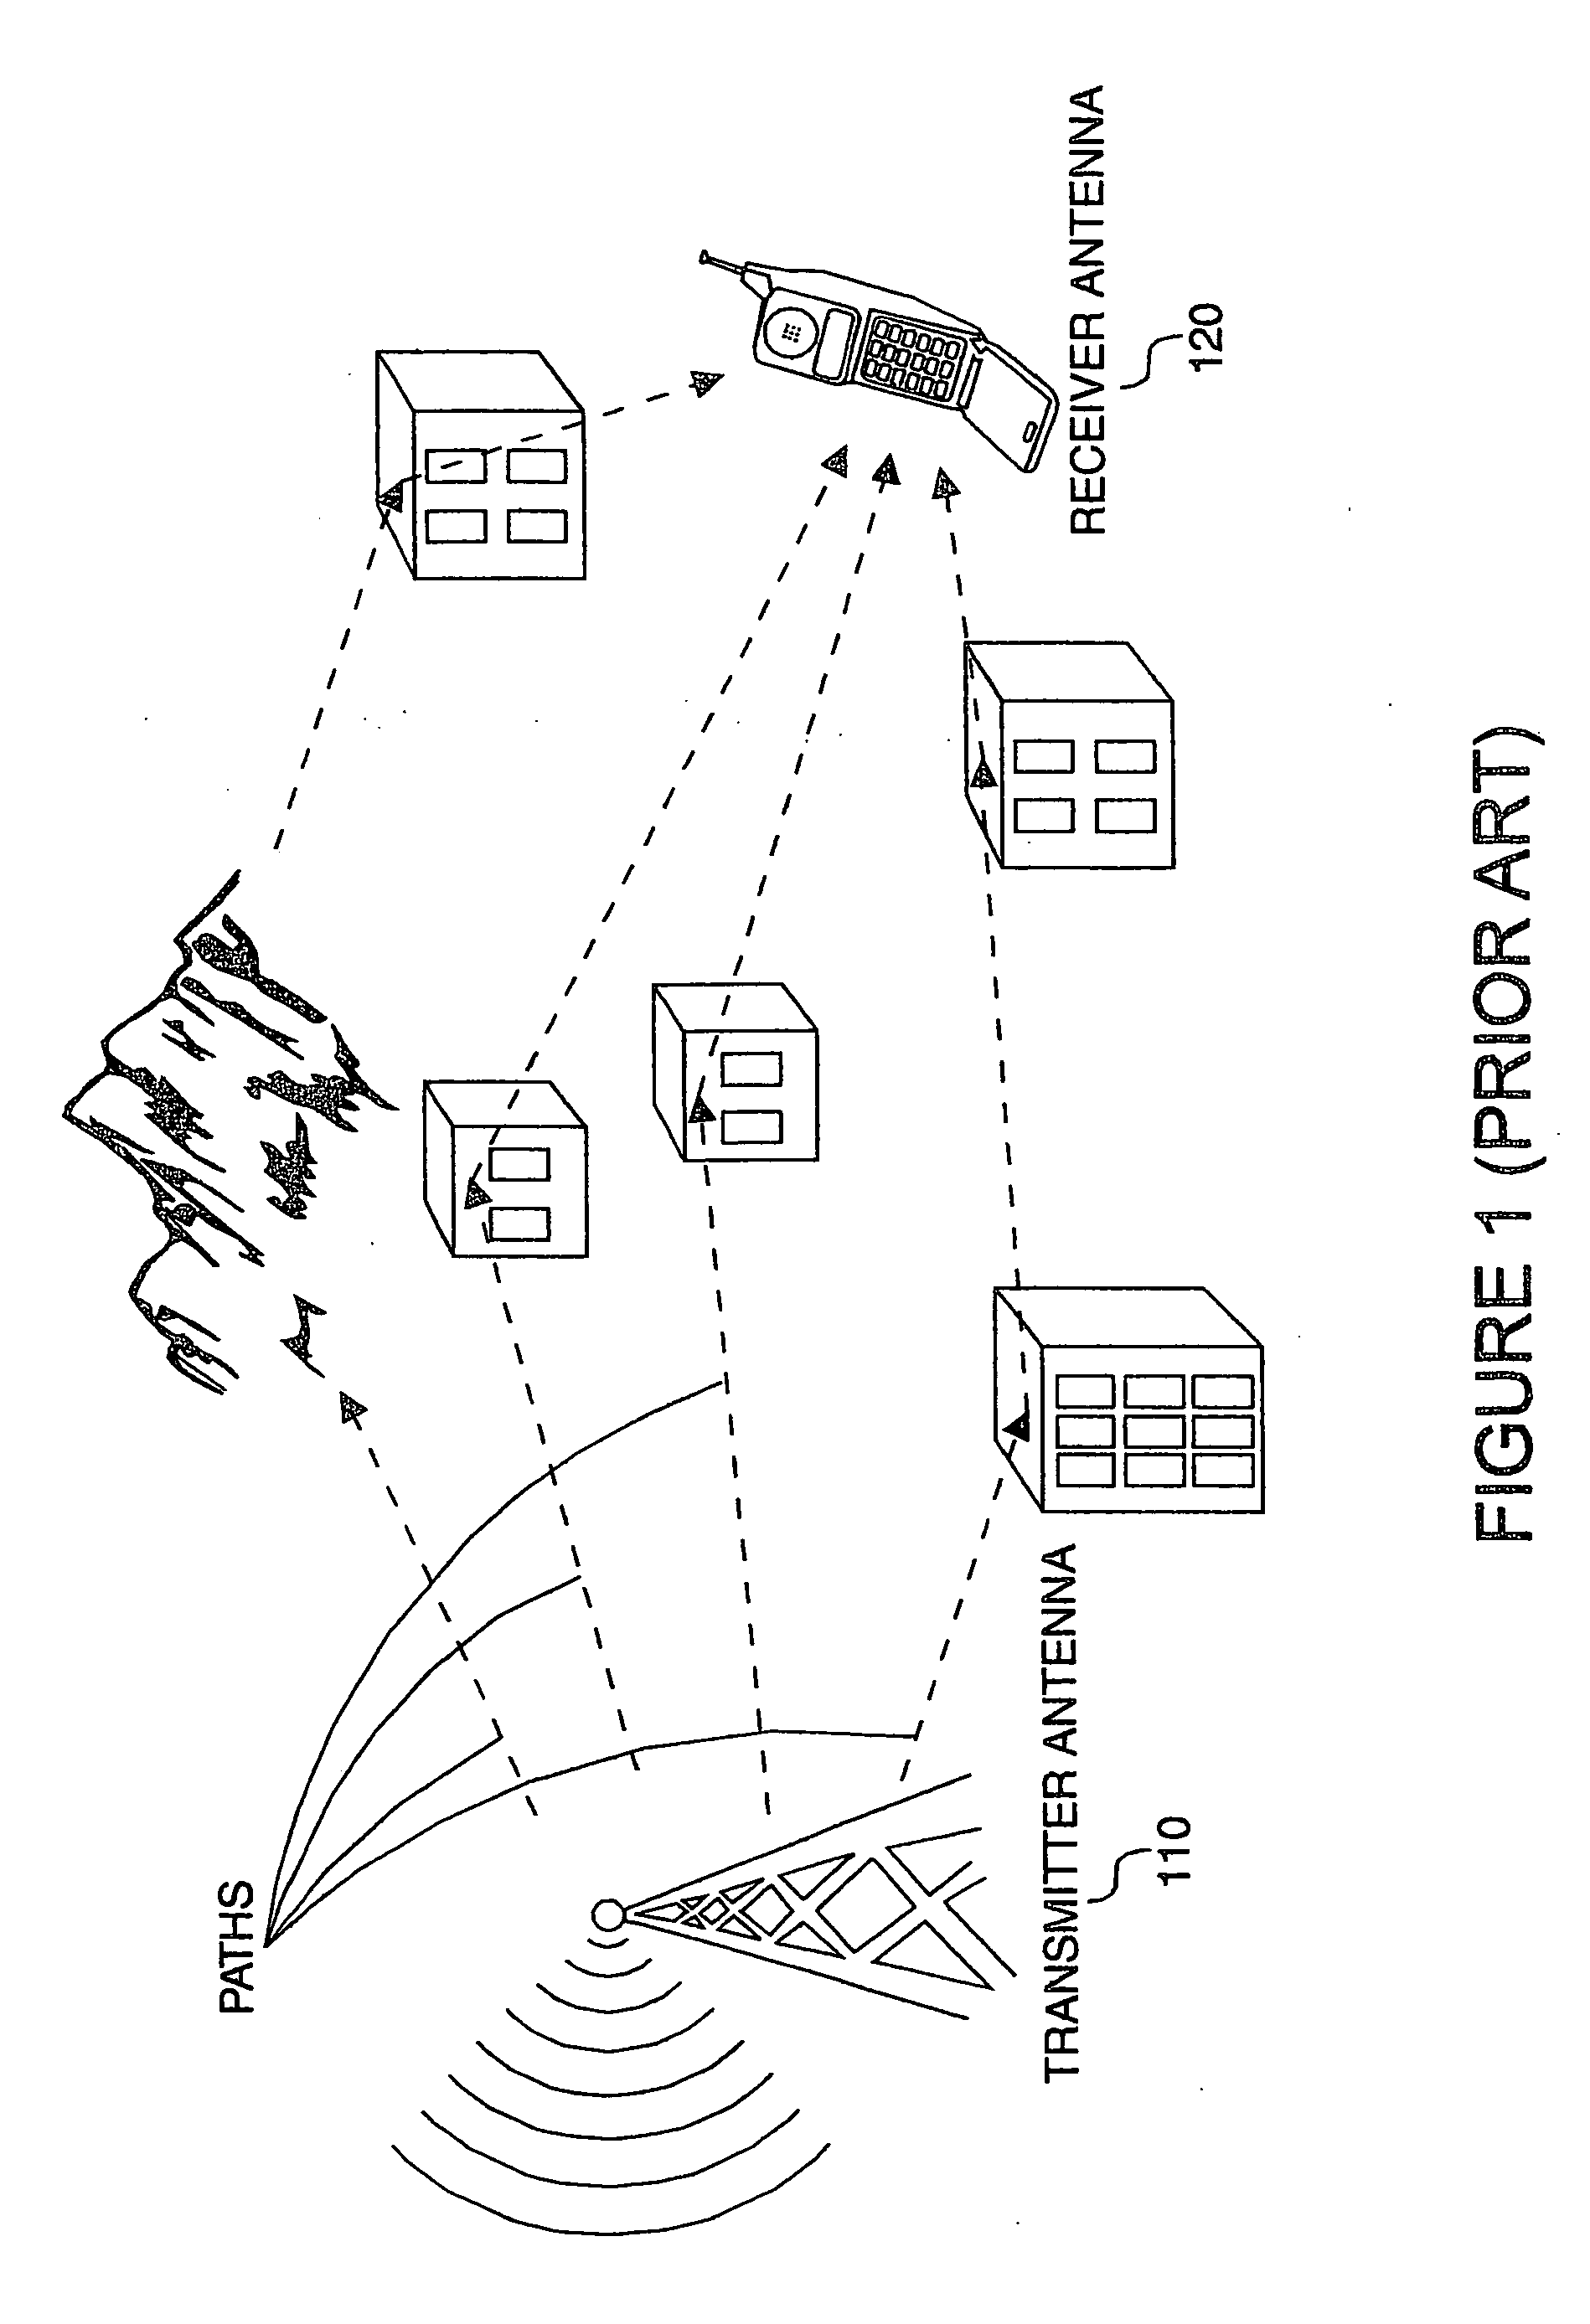 System and method for multiple signal carrier time domain channel estimation